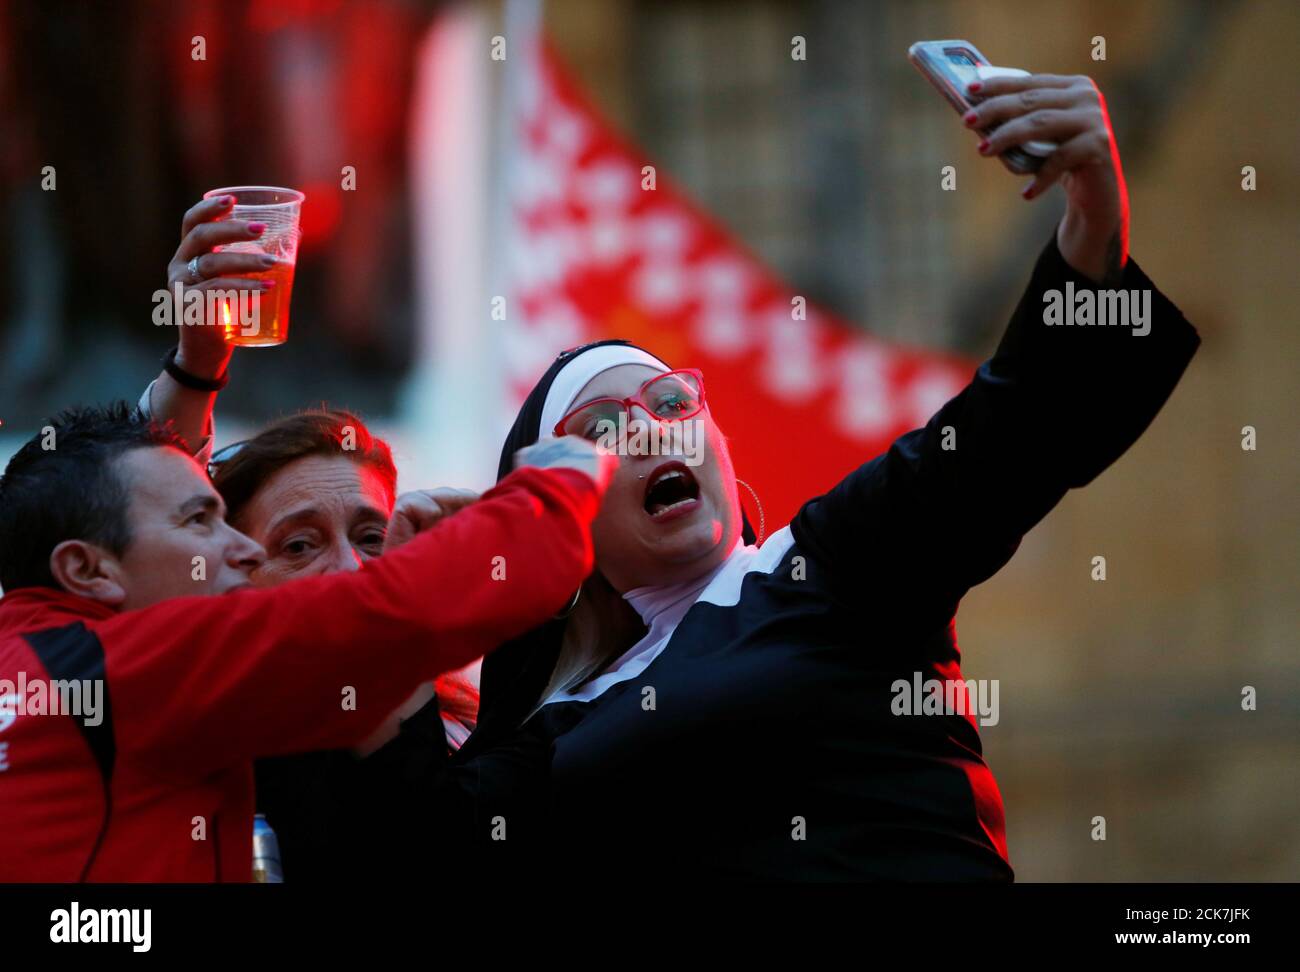 Valletta supporters take a selfie while attending a mock funeral as part of  the club's celebrations after winning Malta's premier league soccer  championship for the 25th time, during which they taunt rival